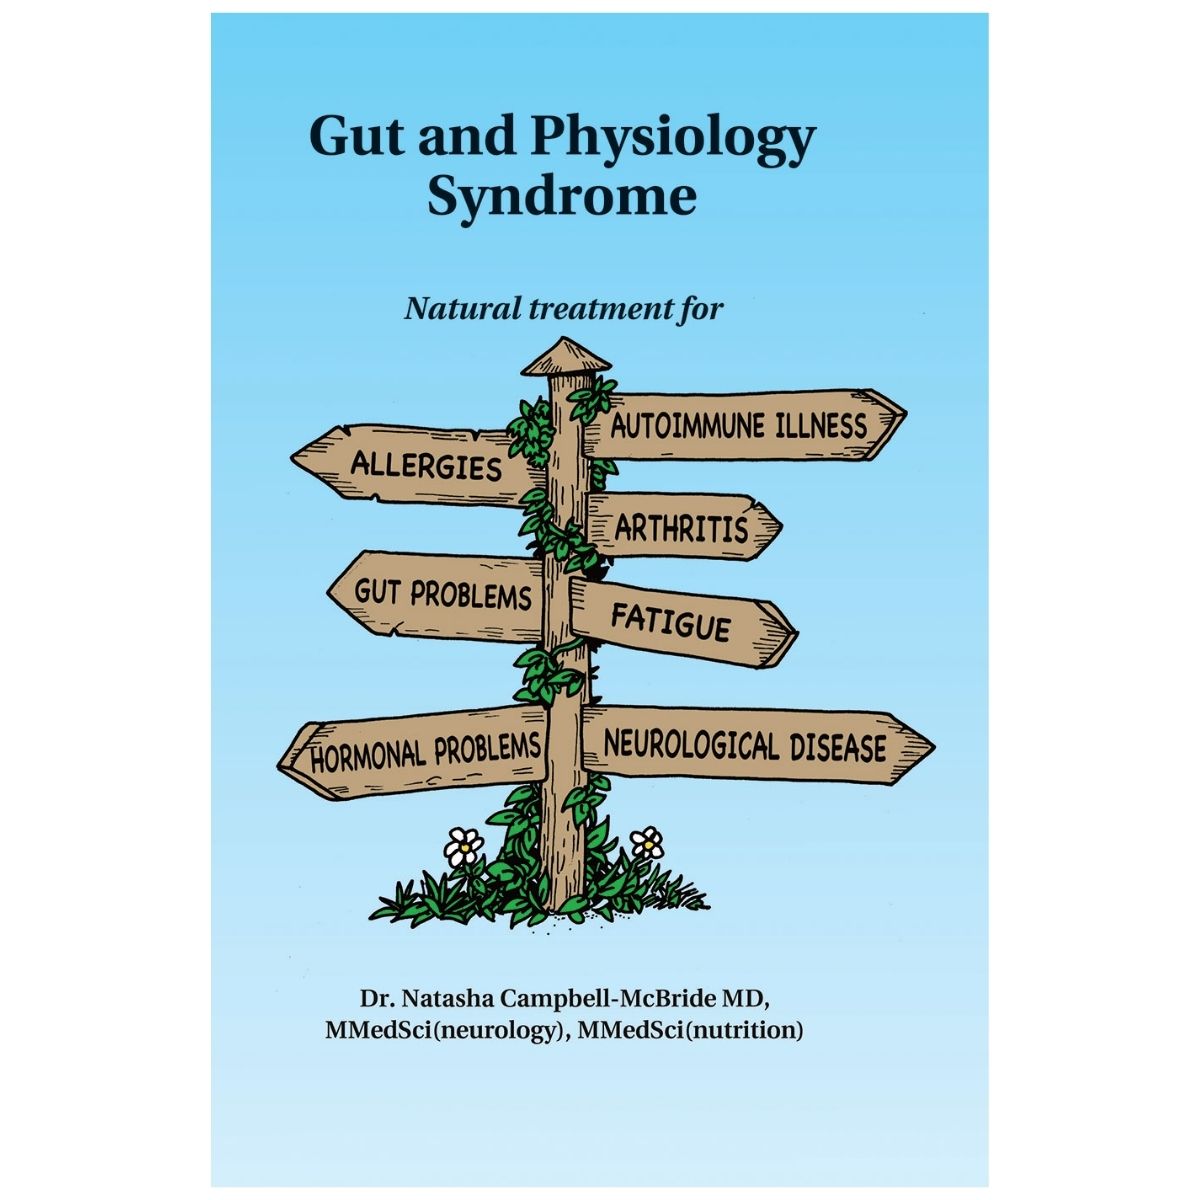 Gut and Physiology Syndrome